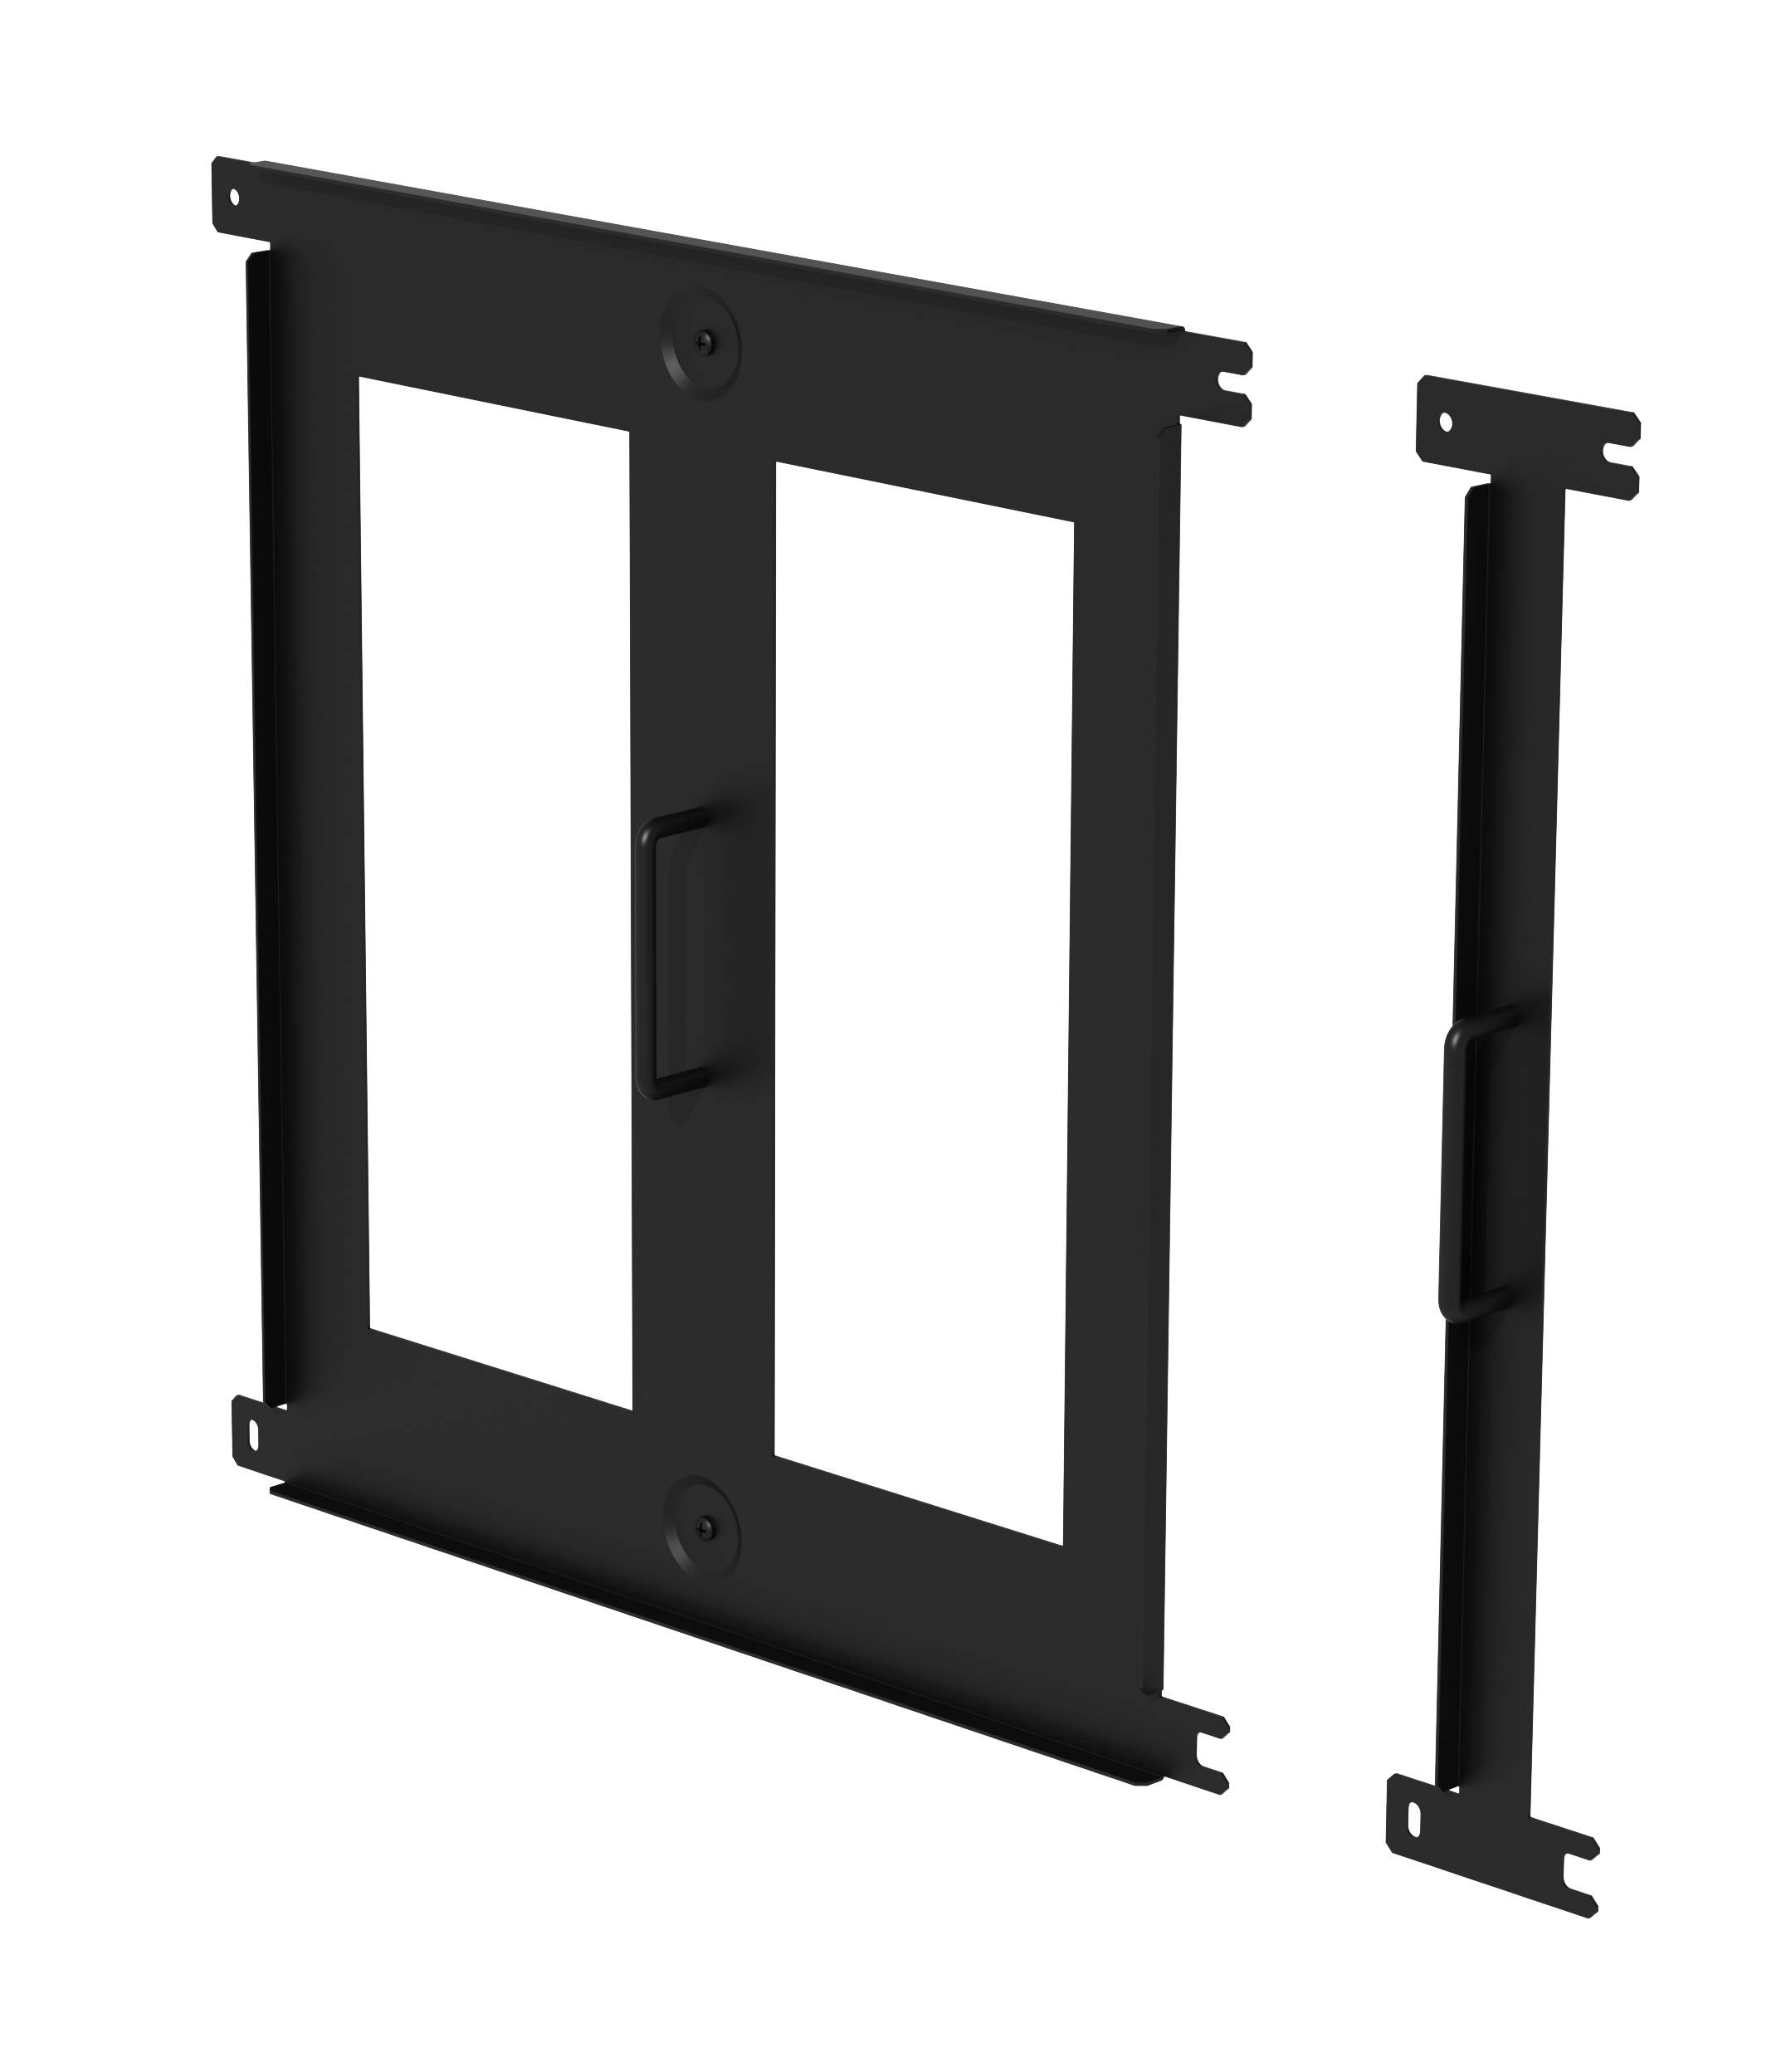 DS-VWRS086 Reusable Video Wall Spacer